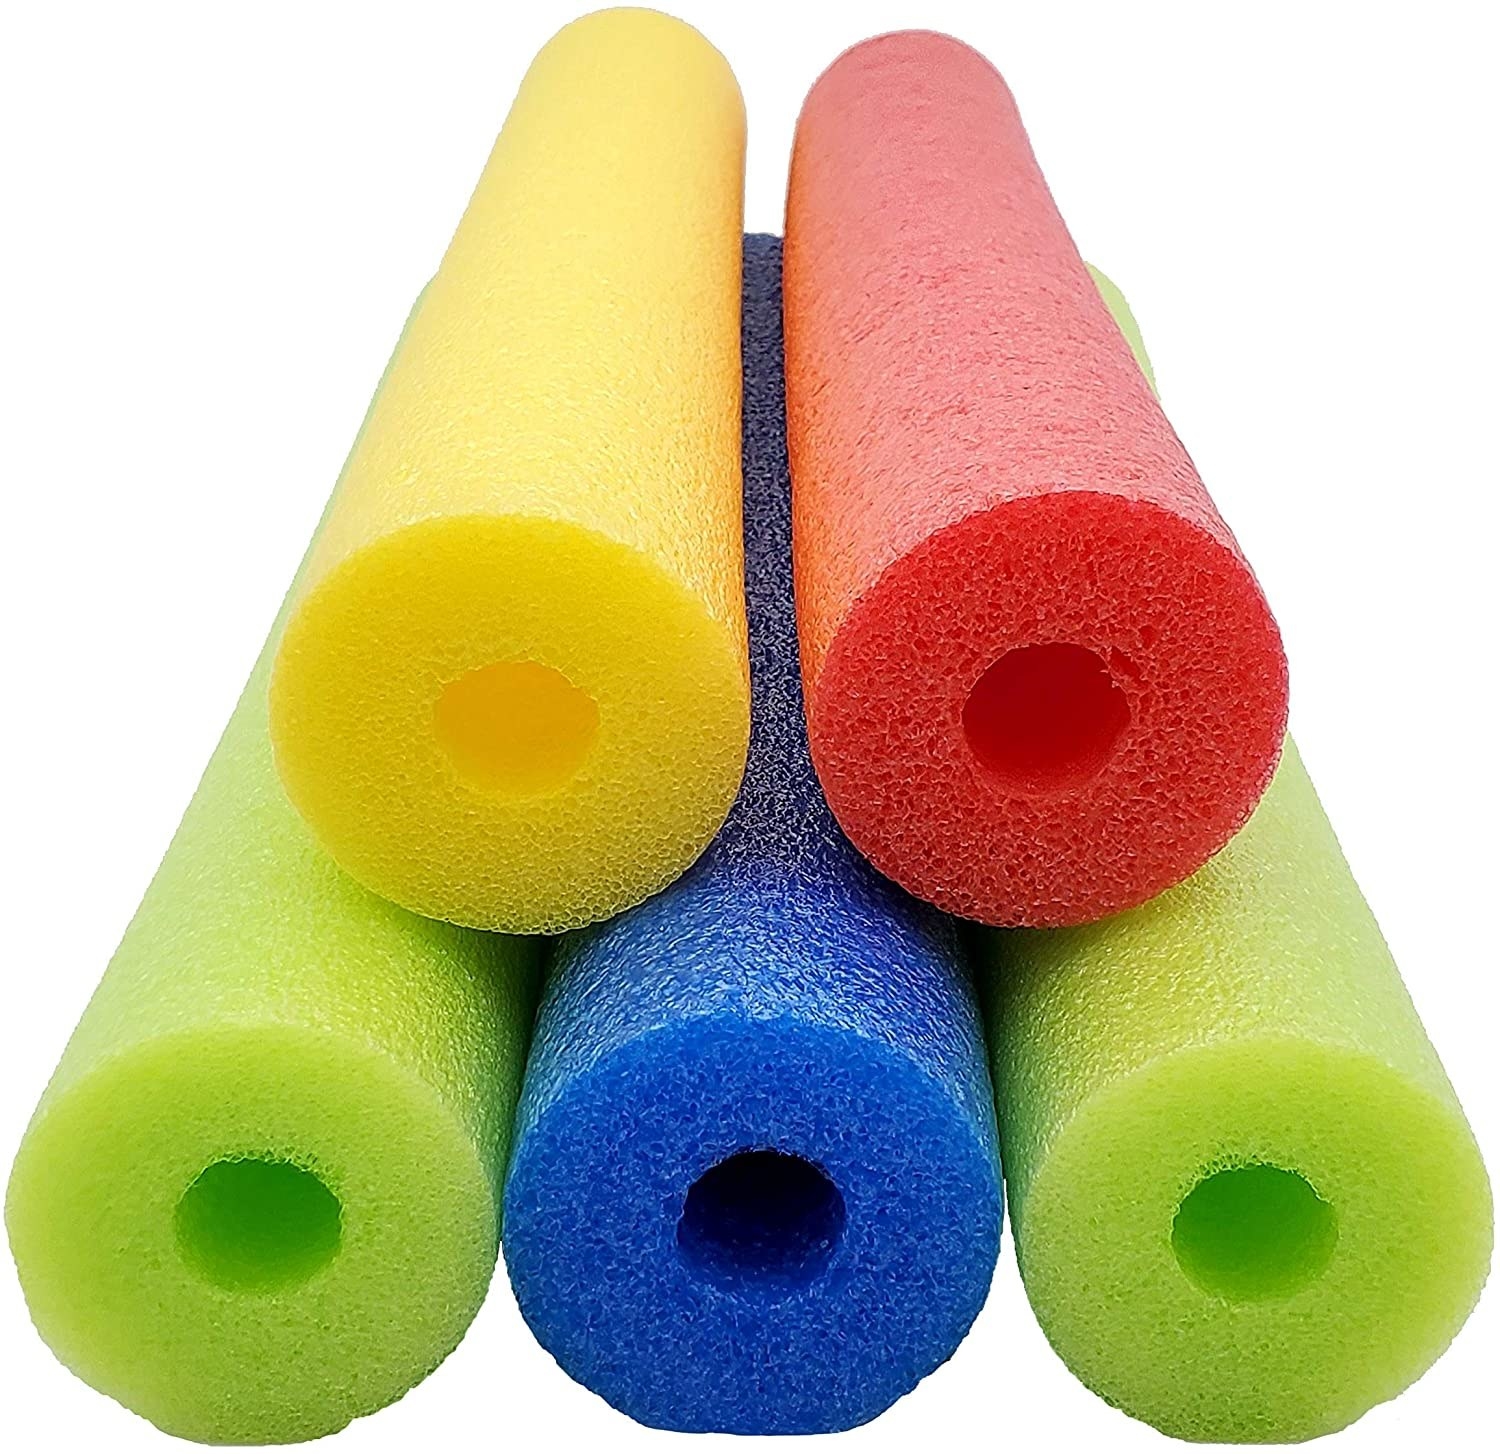 Red, green, yellow, and blue foam pool noodles